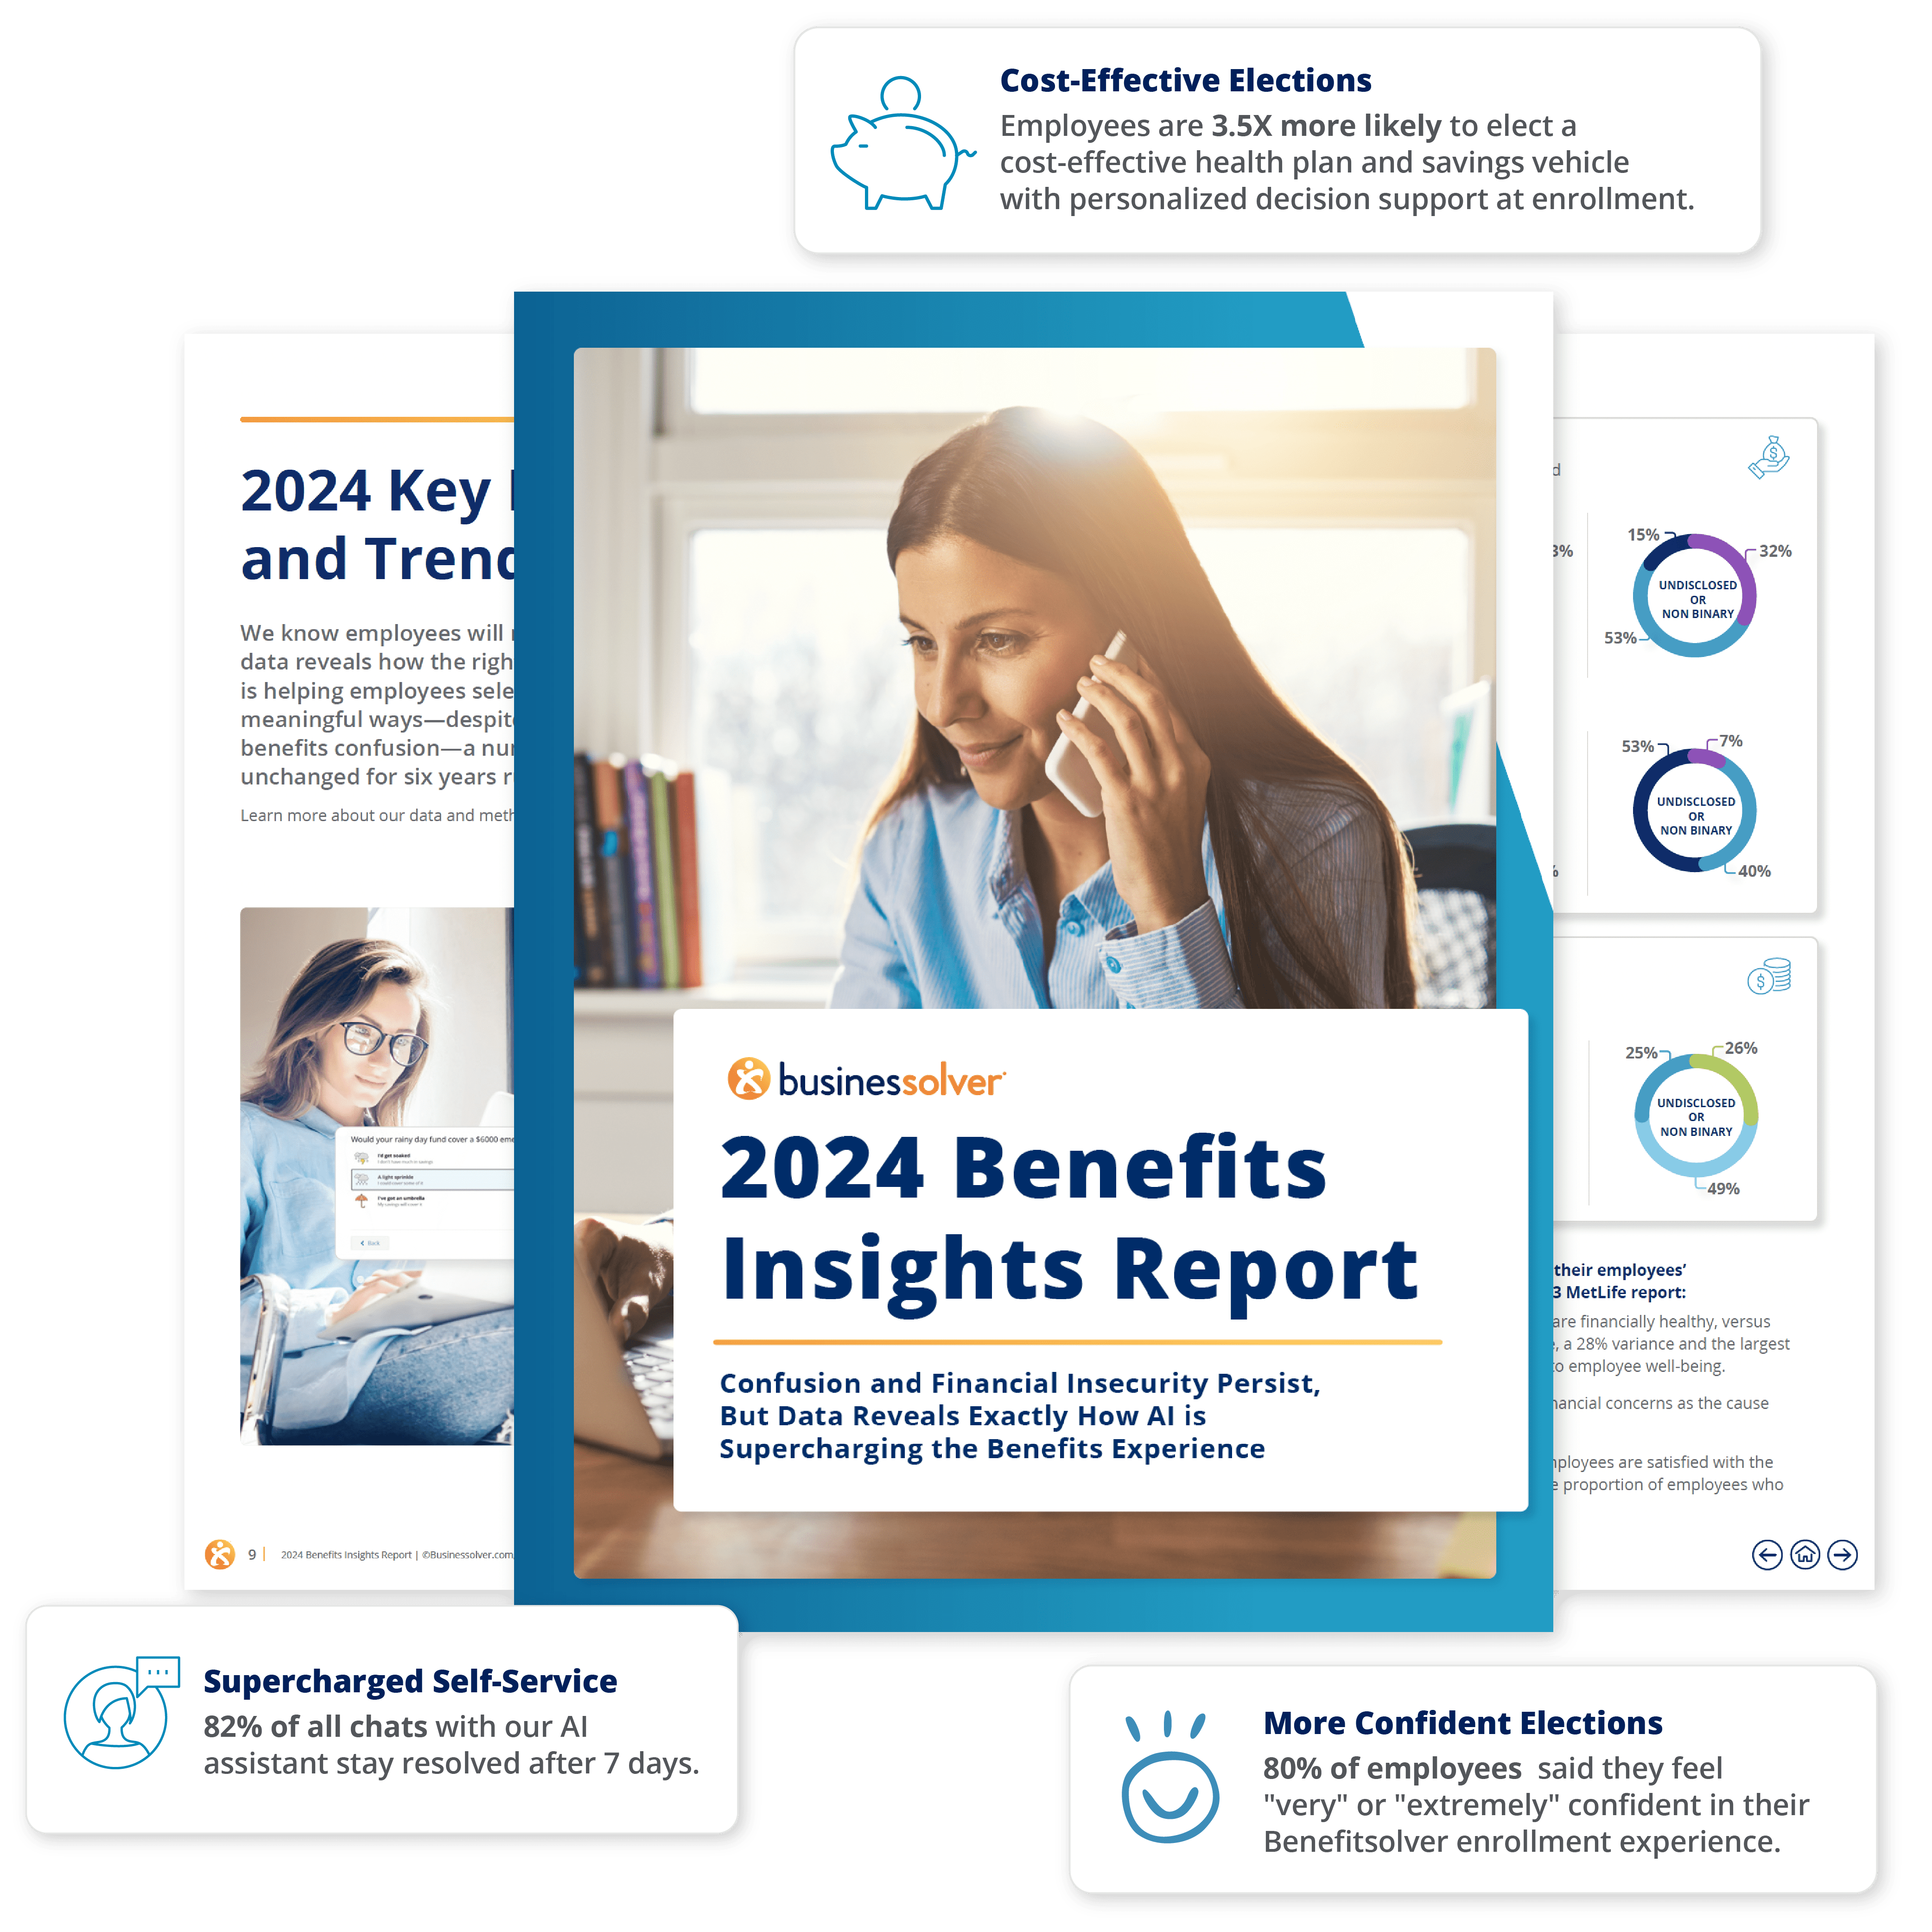 businessolver's 2024 benefits insights report cover